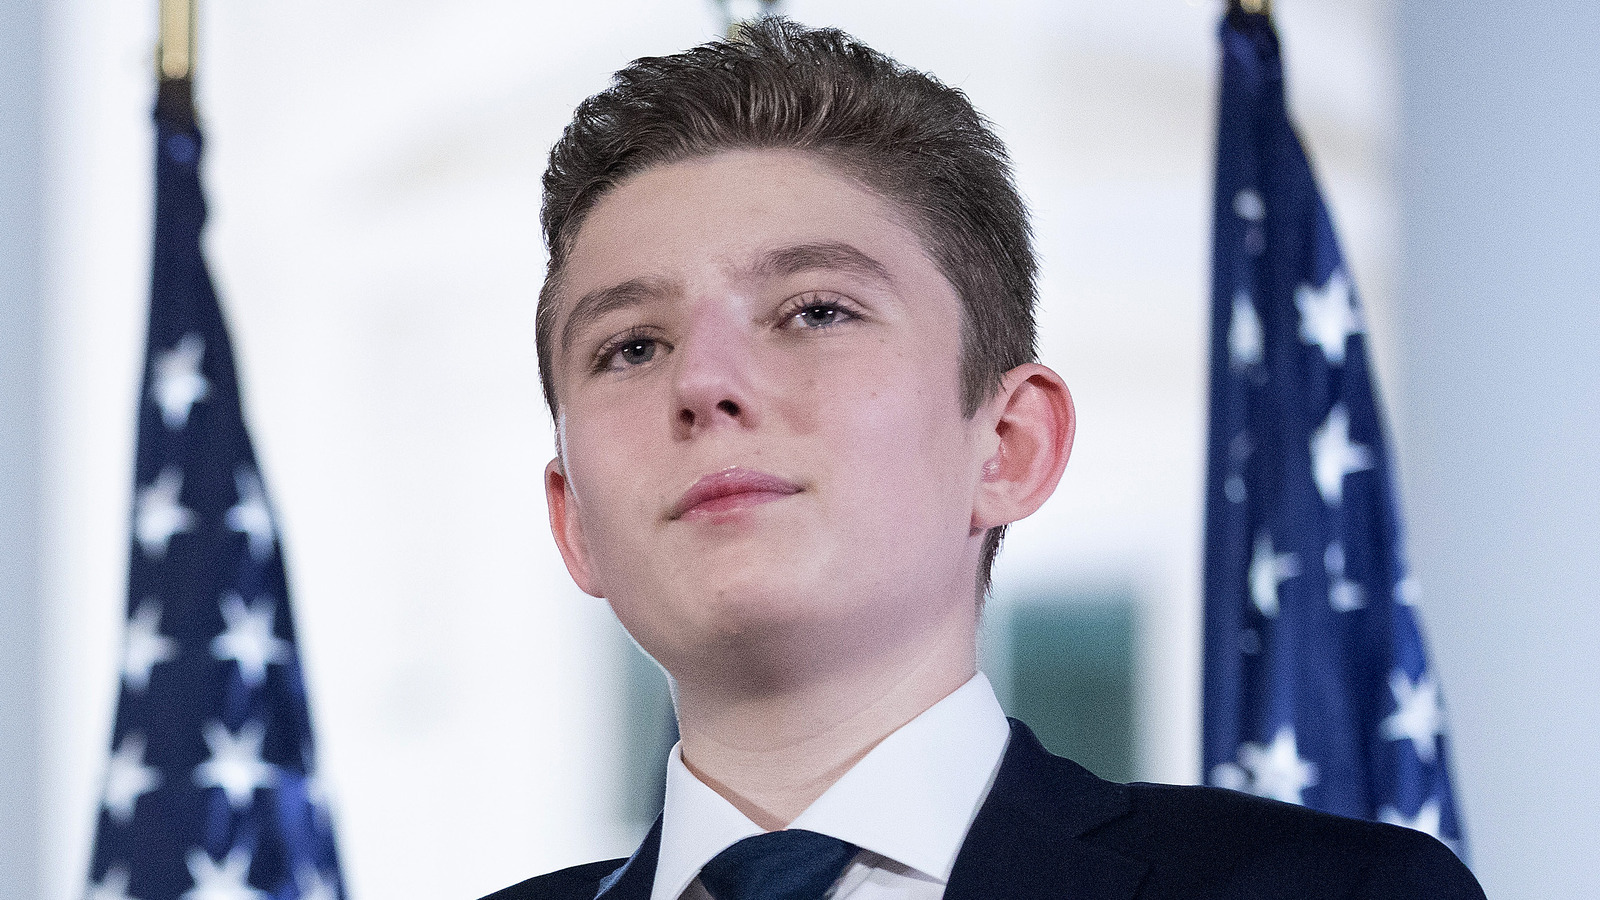 Everything We Know About Donald Trump's Youngest Son, Barron